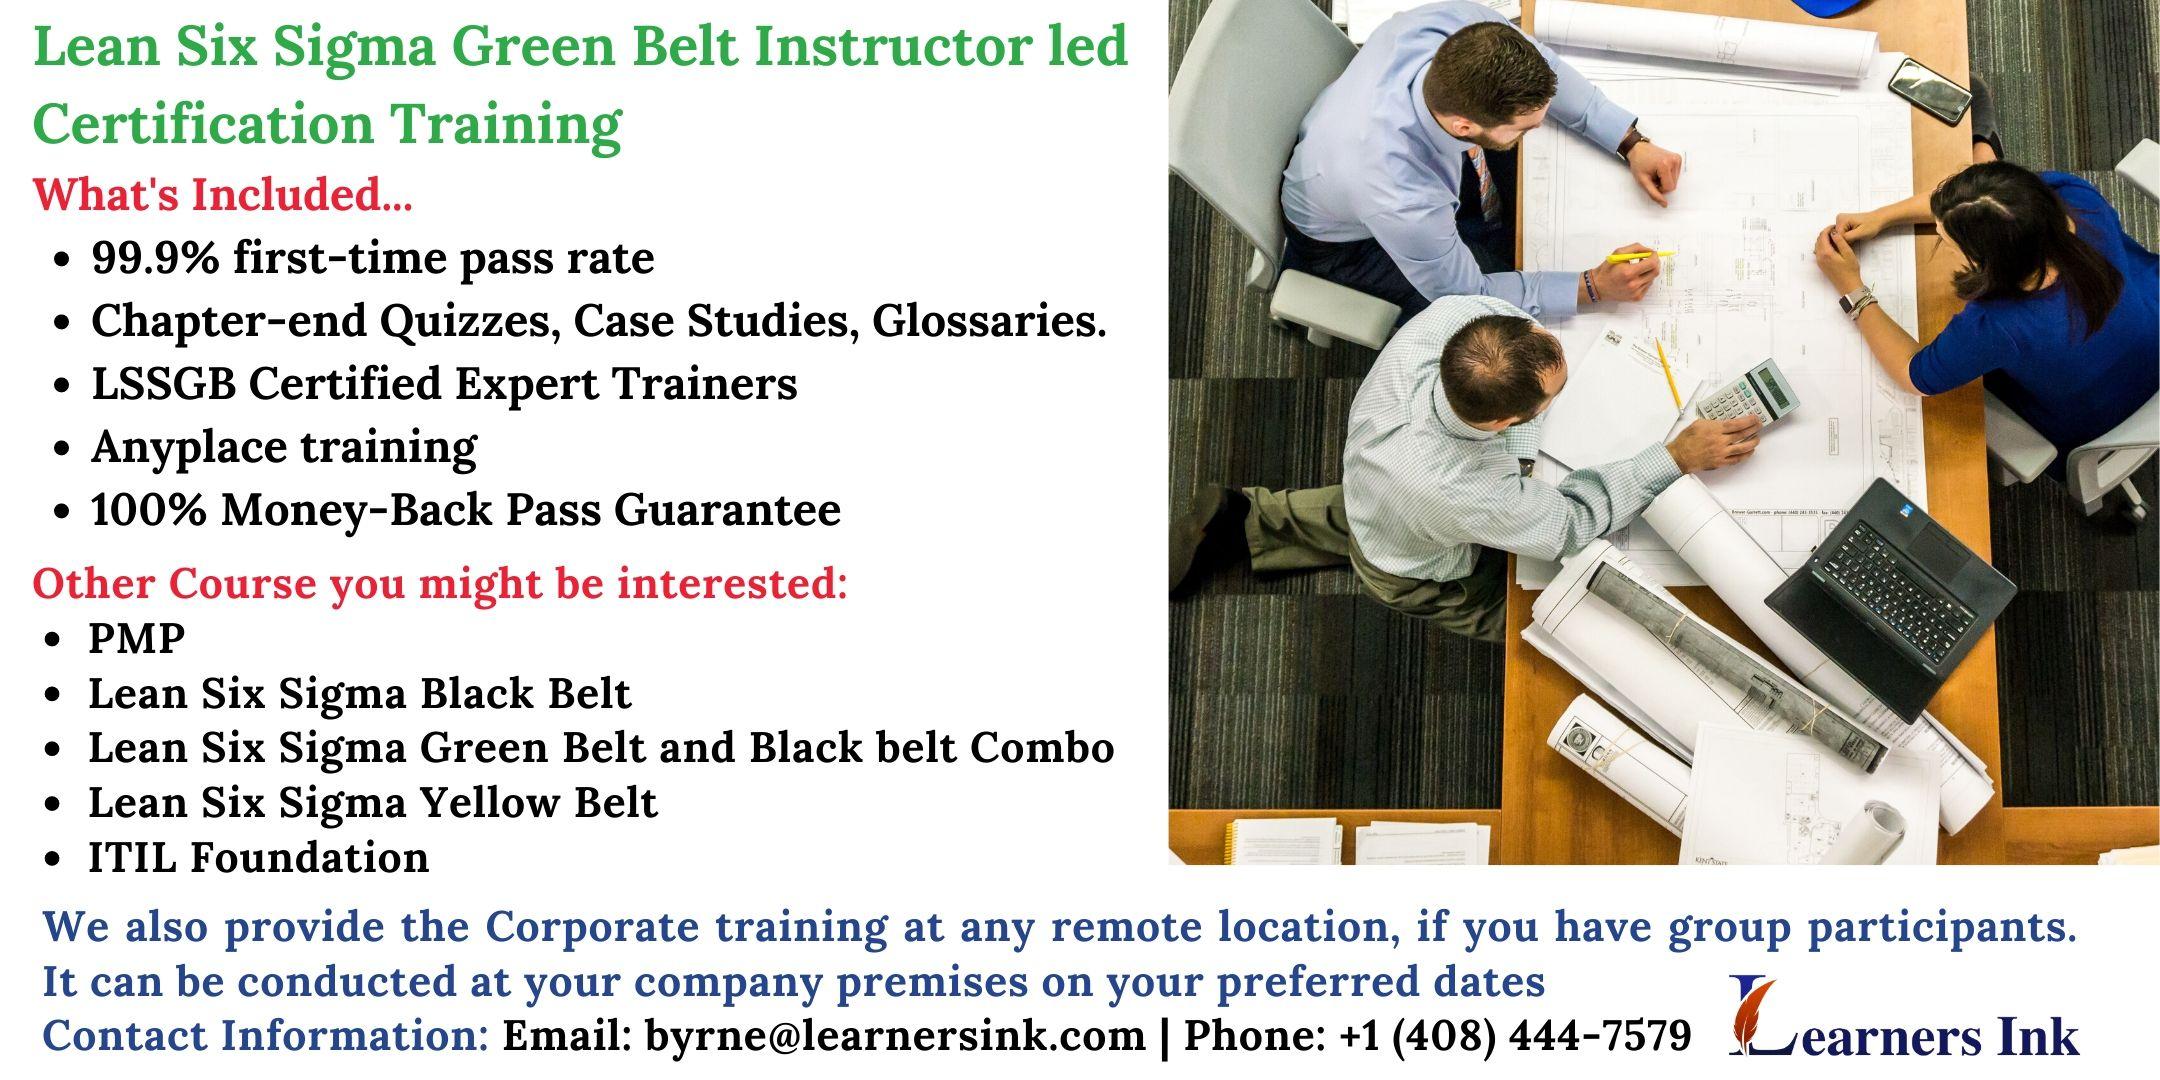 Lean Six Sigma Green Belt Certification Training Course (LSSGB) in Tempe